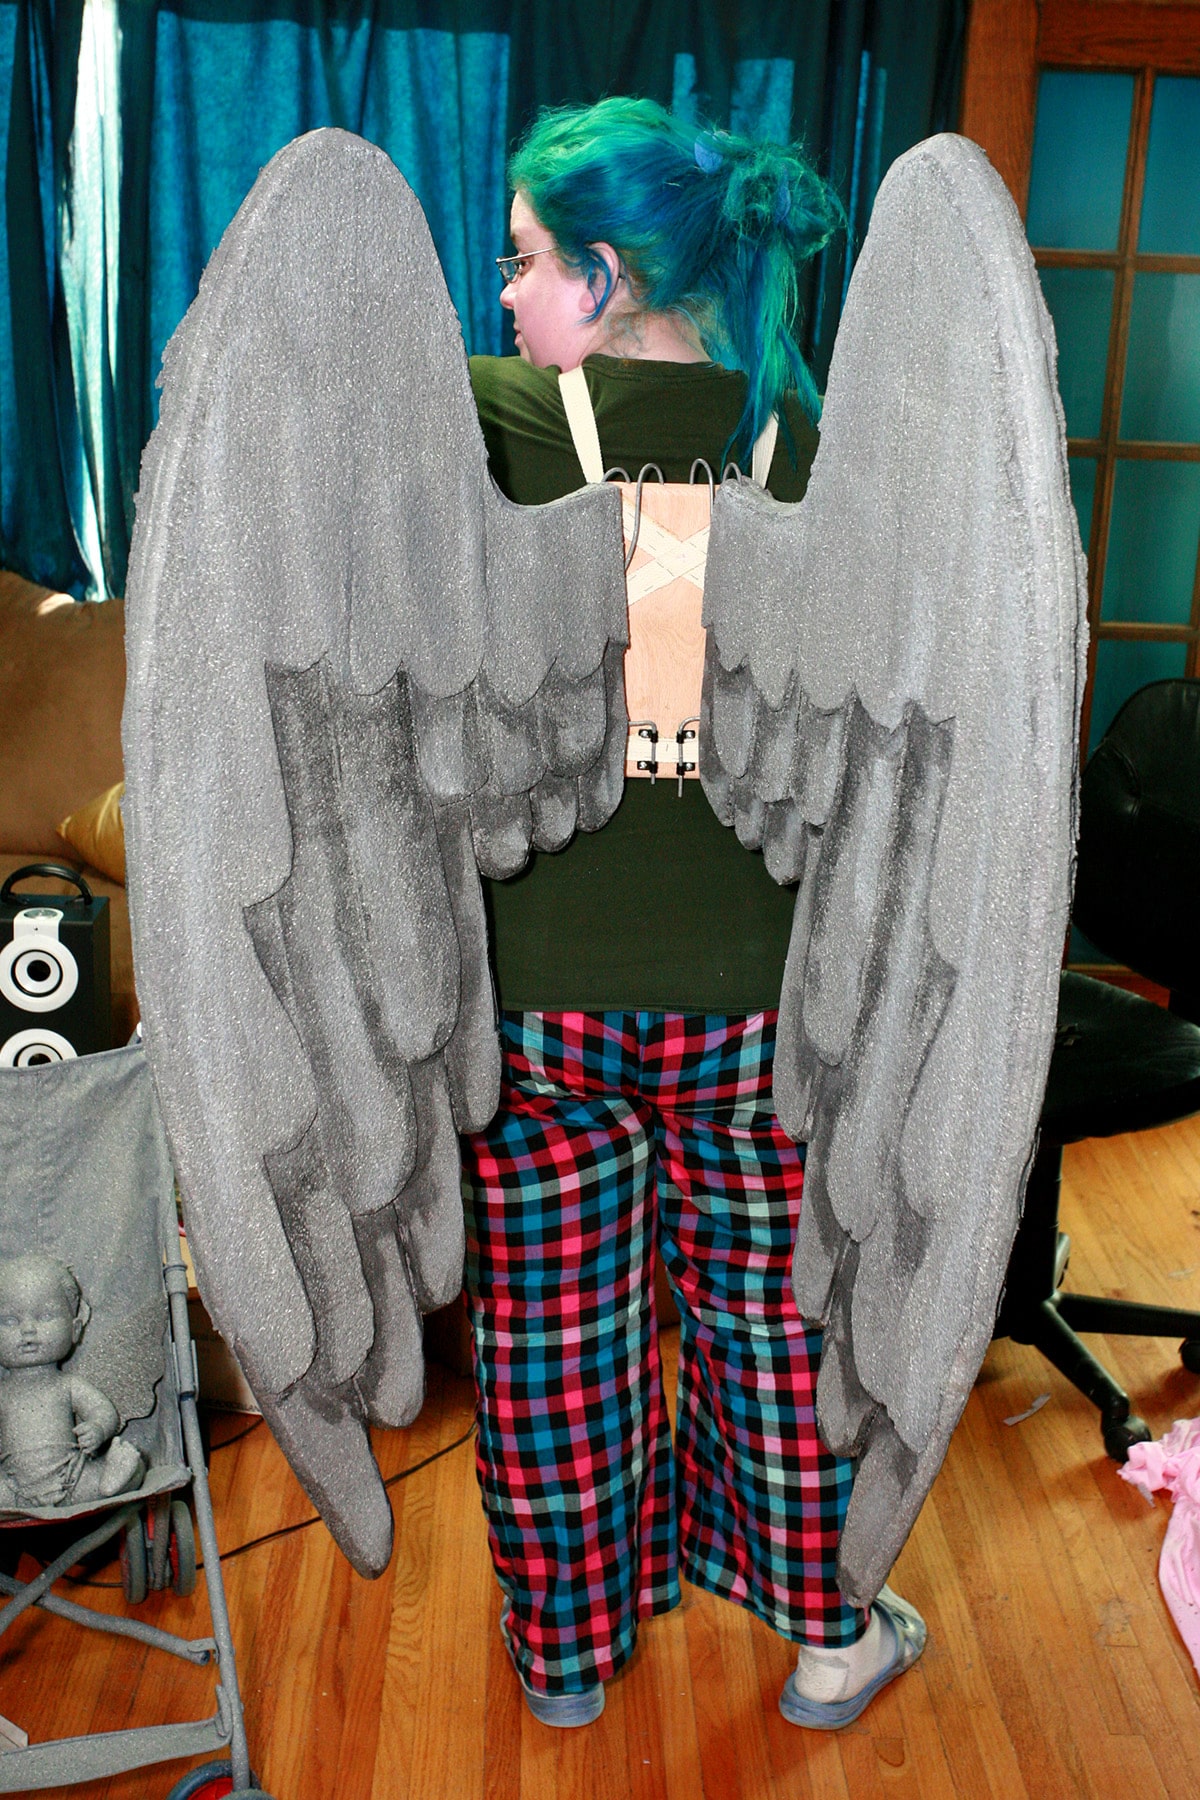 A woman in bright PJ pants has a harness and set of large grey angel wings on her back.